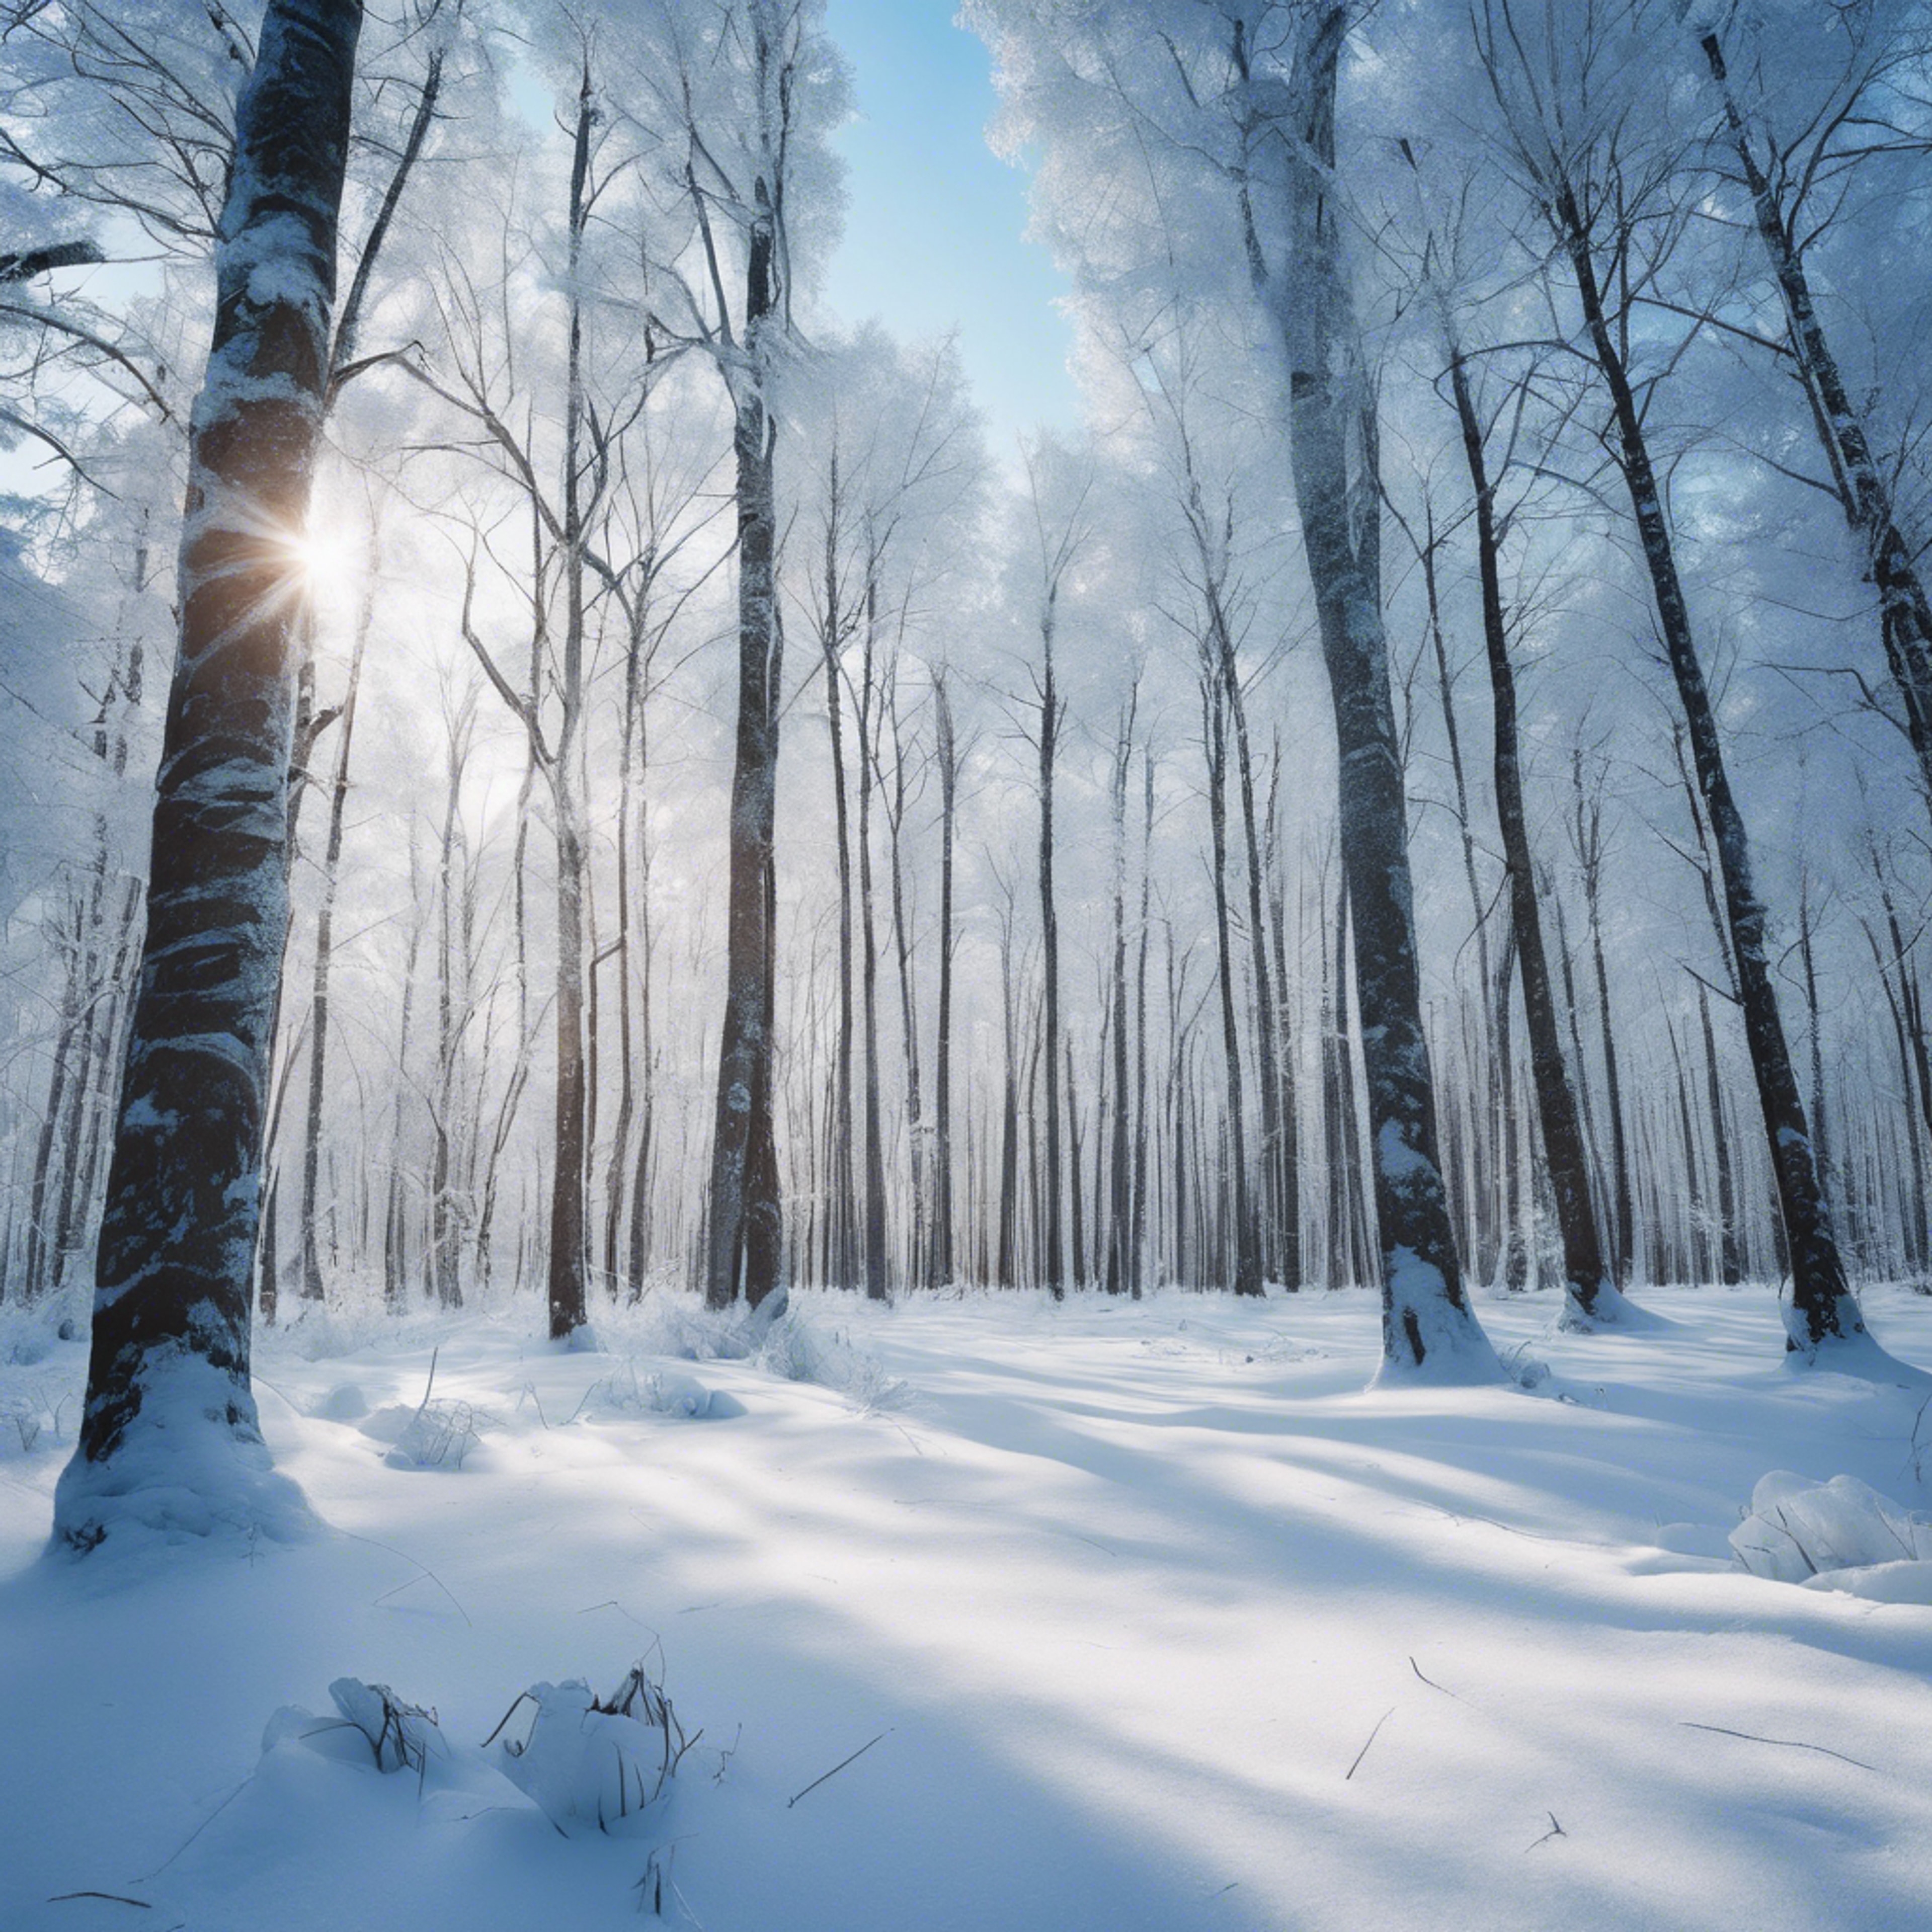 Landscape of a cold winter forest with blue shadows on pure white snow.壁紙[f6549bc56b8442c7ab62]